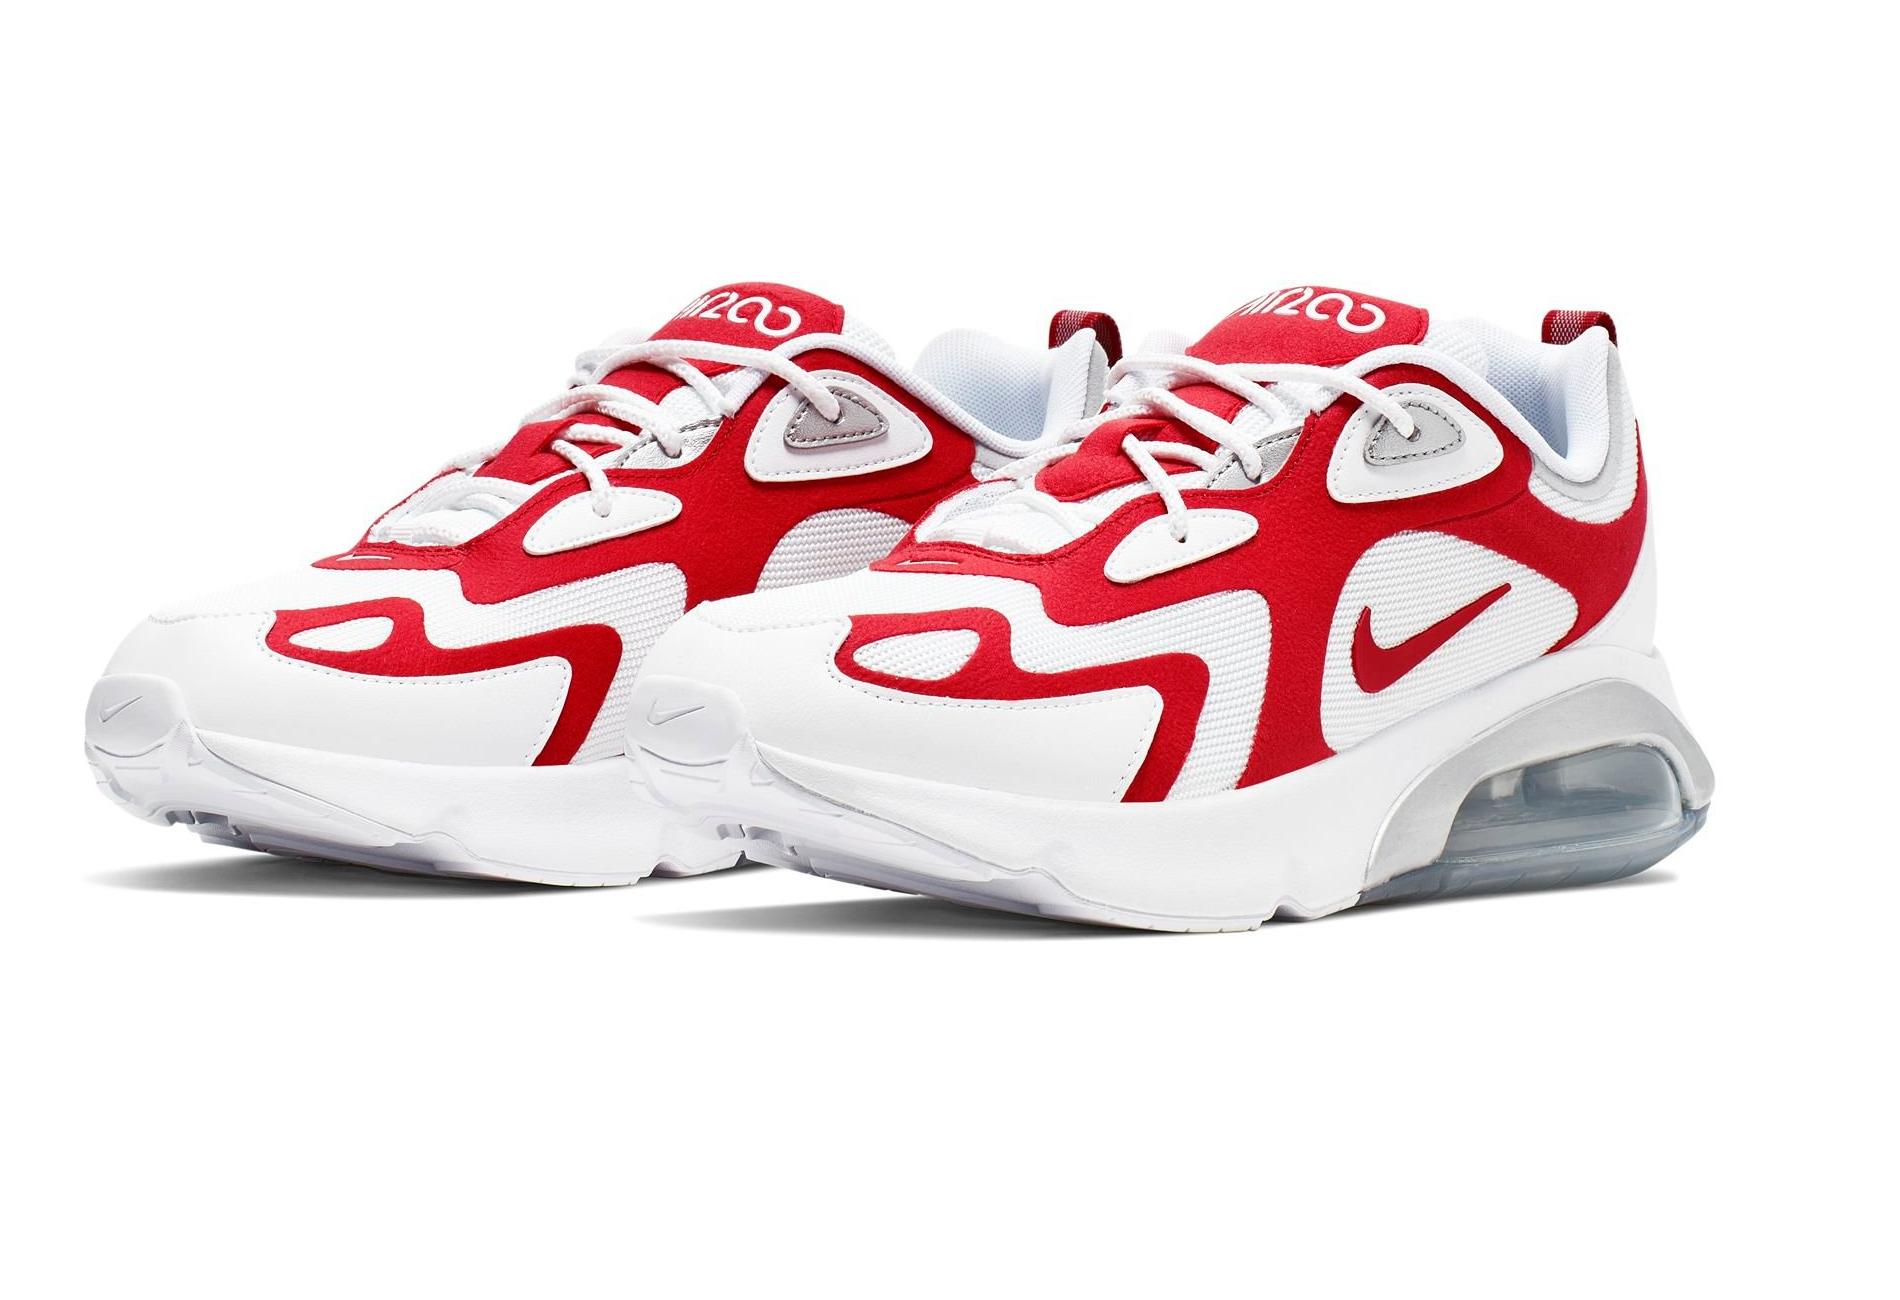 Sneakers Release : Nike Air Max 200 “White/University Red”